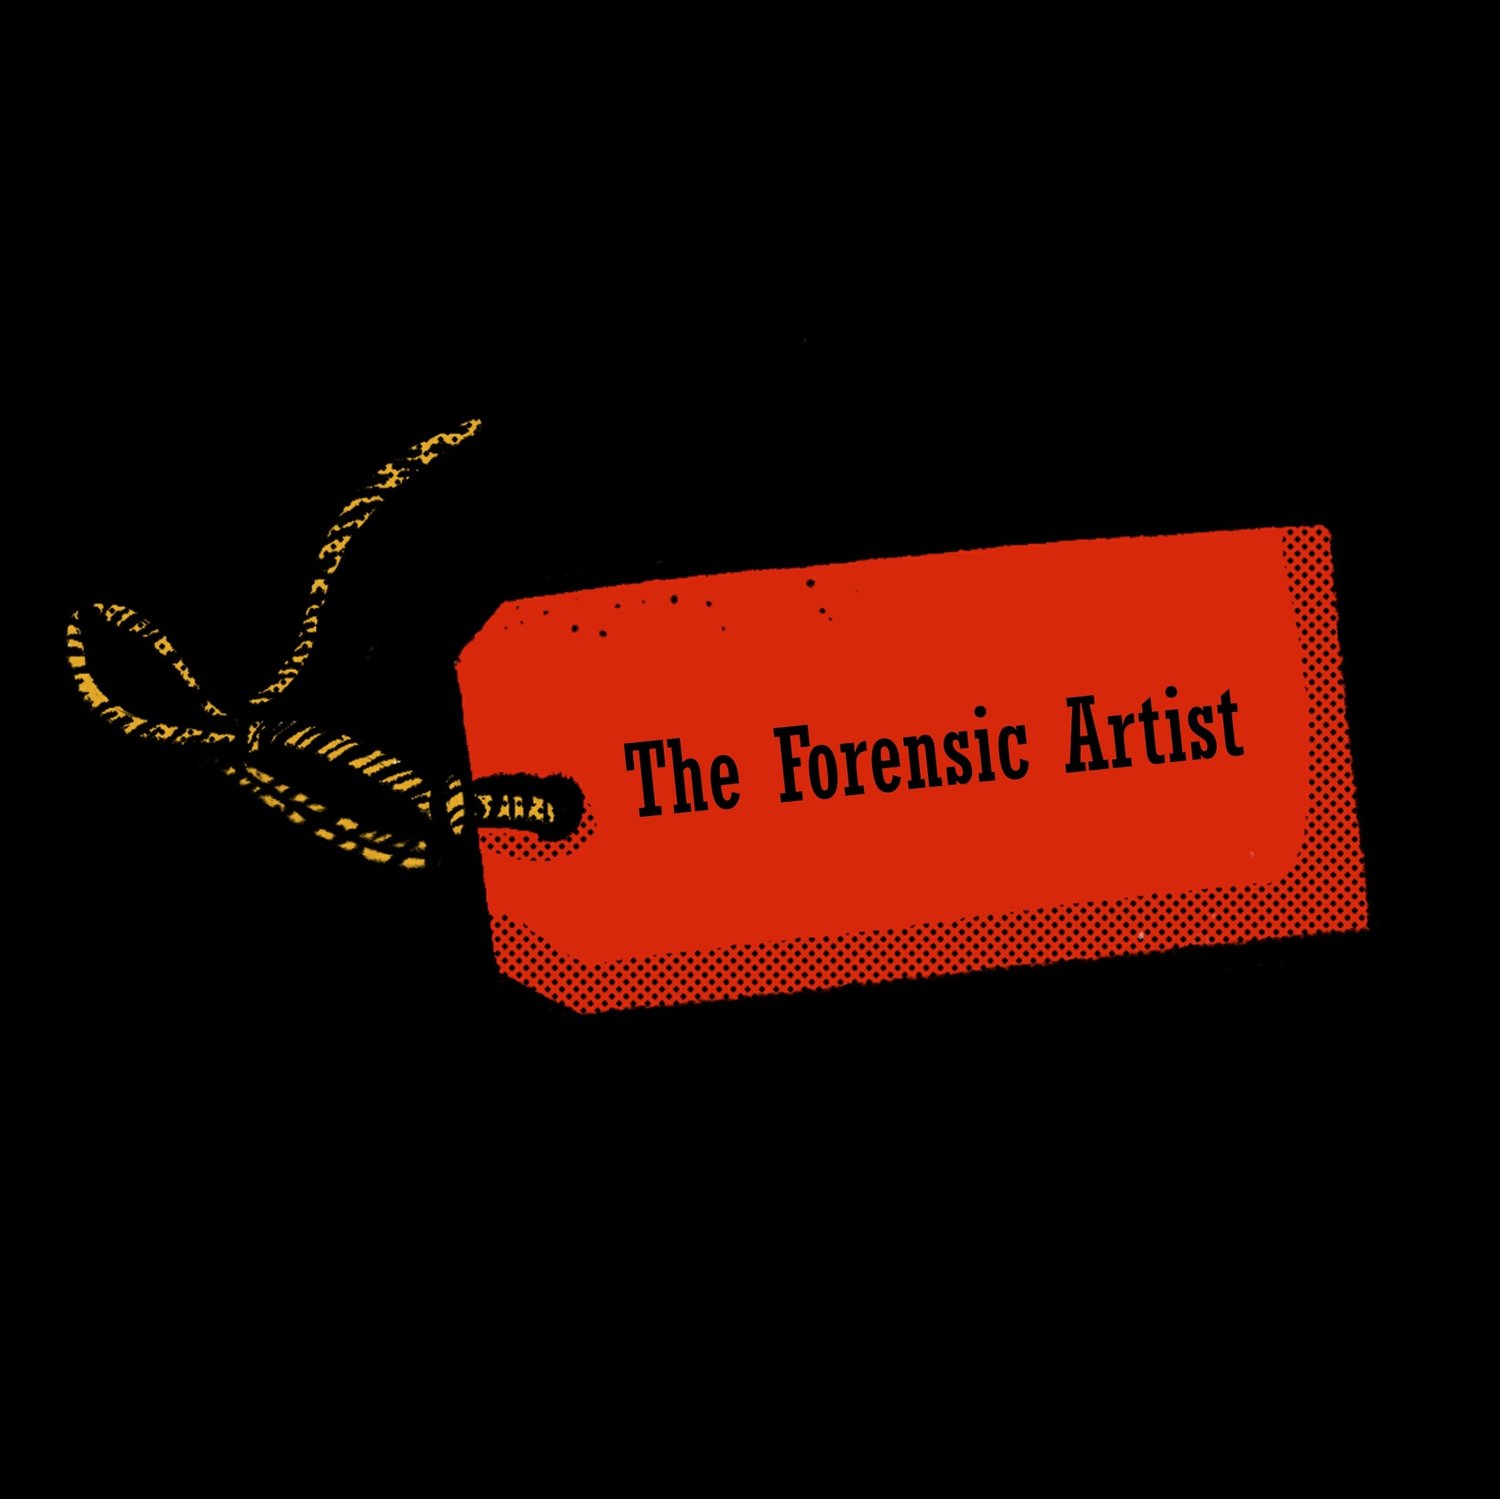 Episode 18: The Forensic Artist